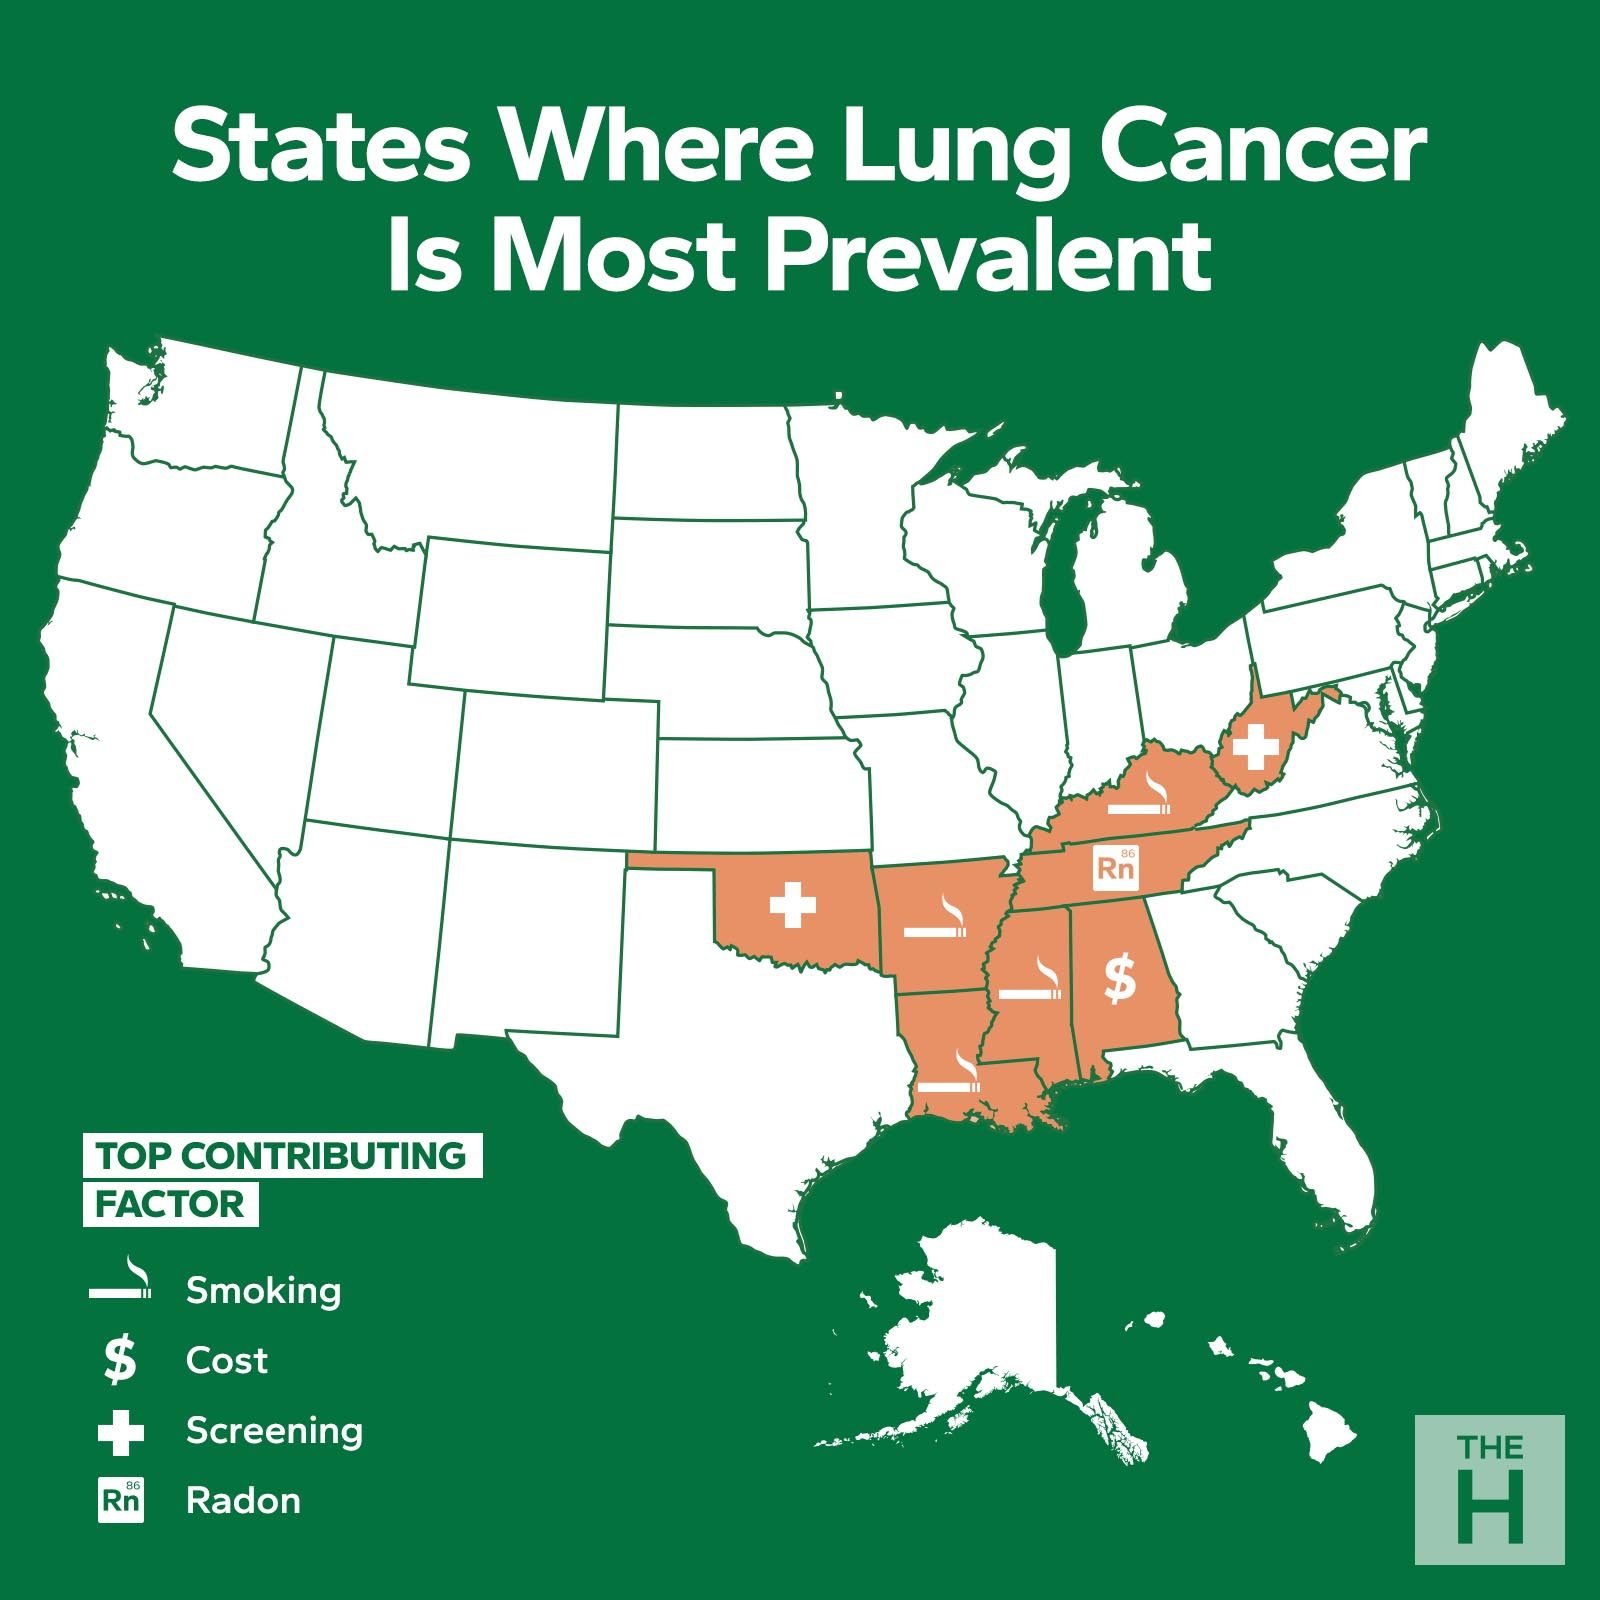 Lung Cancer Is Worst in These 8 States, New National Report Says